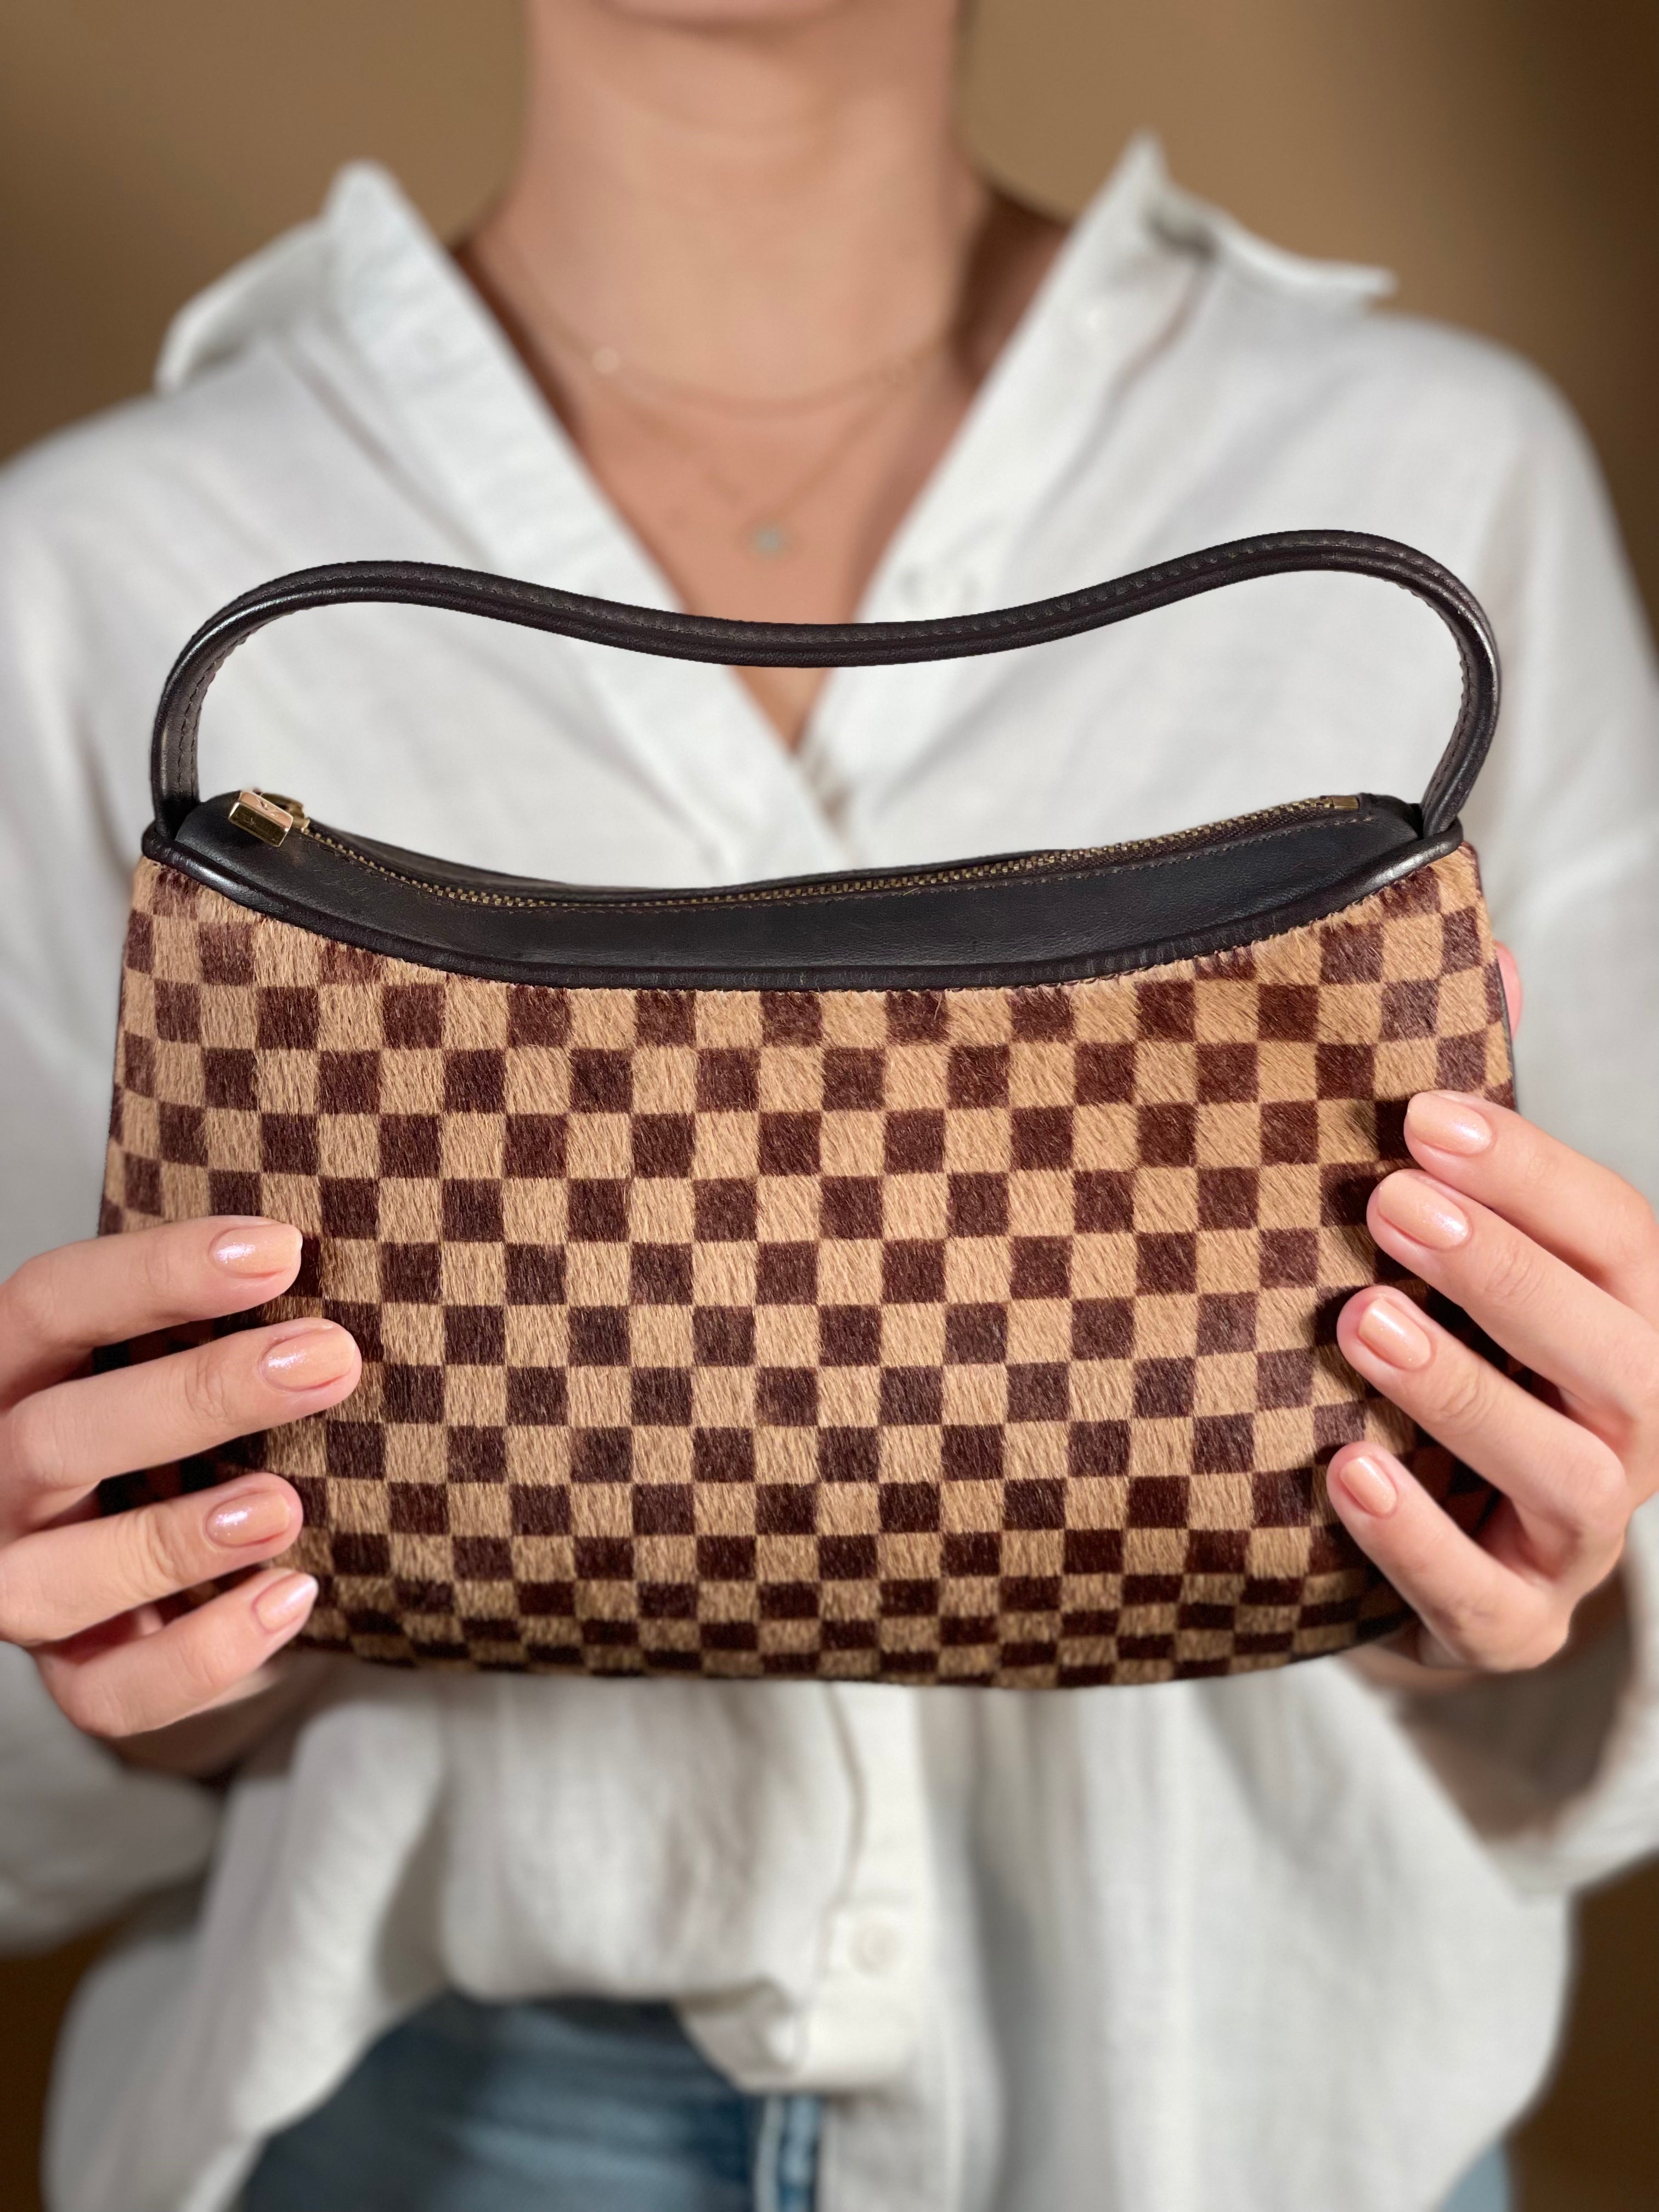 Pre-owned LOUIS VUITTON Bags Classic Checkerboard Brown